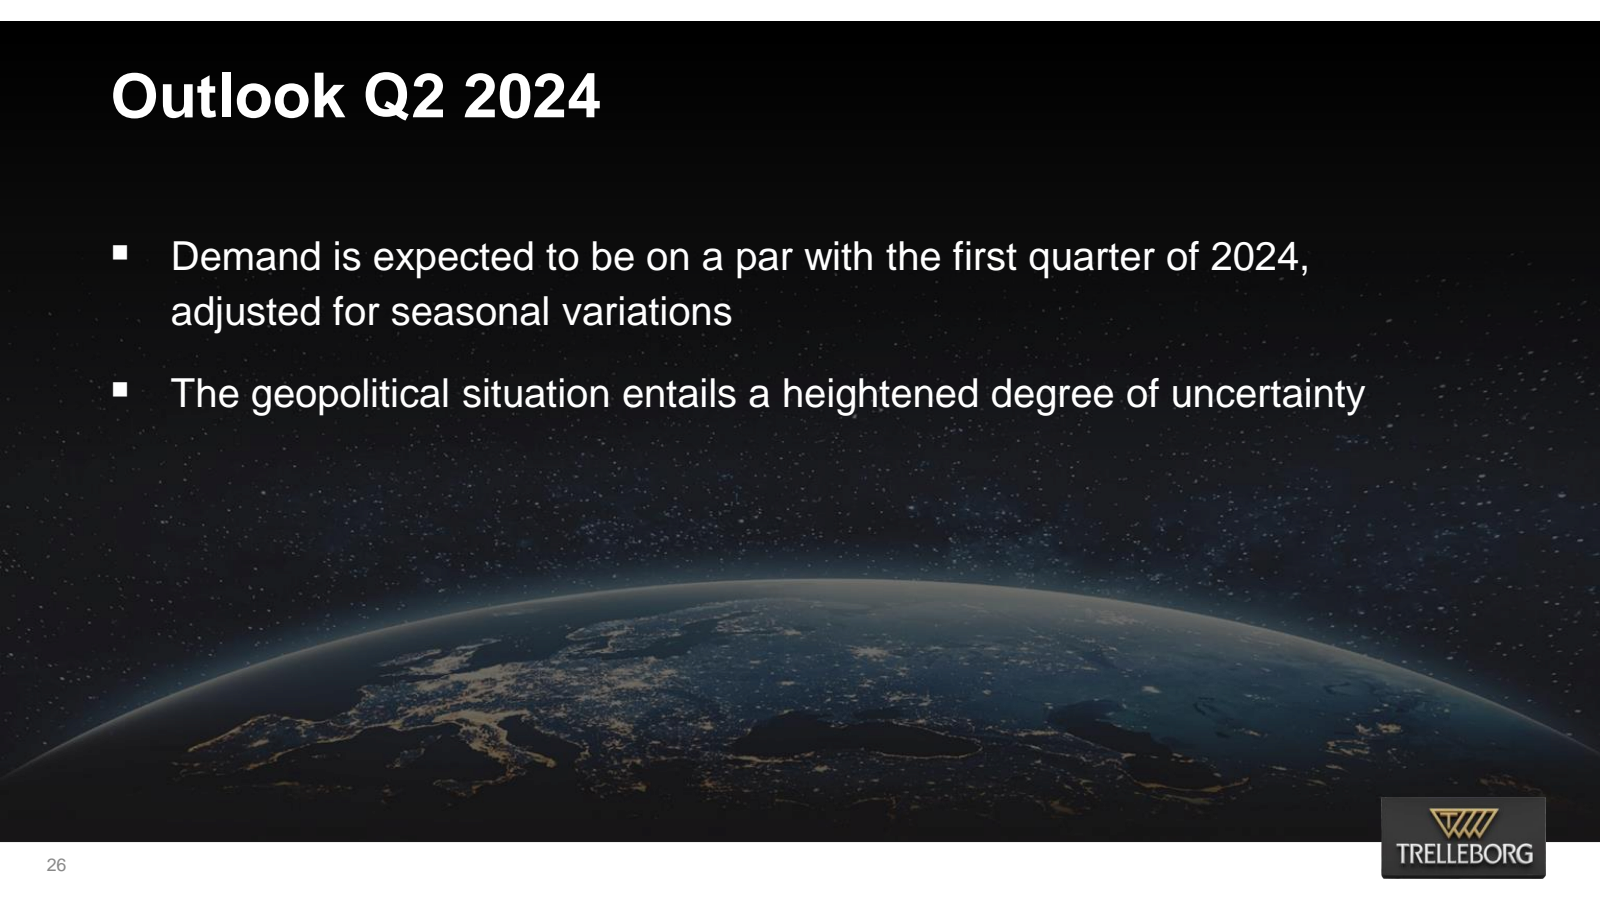 26 

Outlook Q2 2024